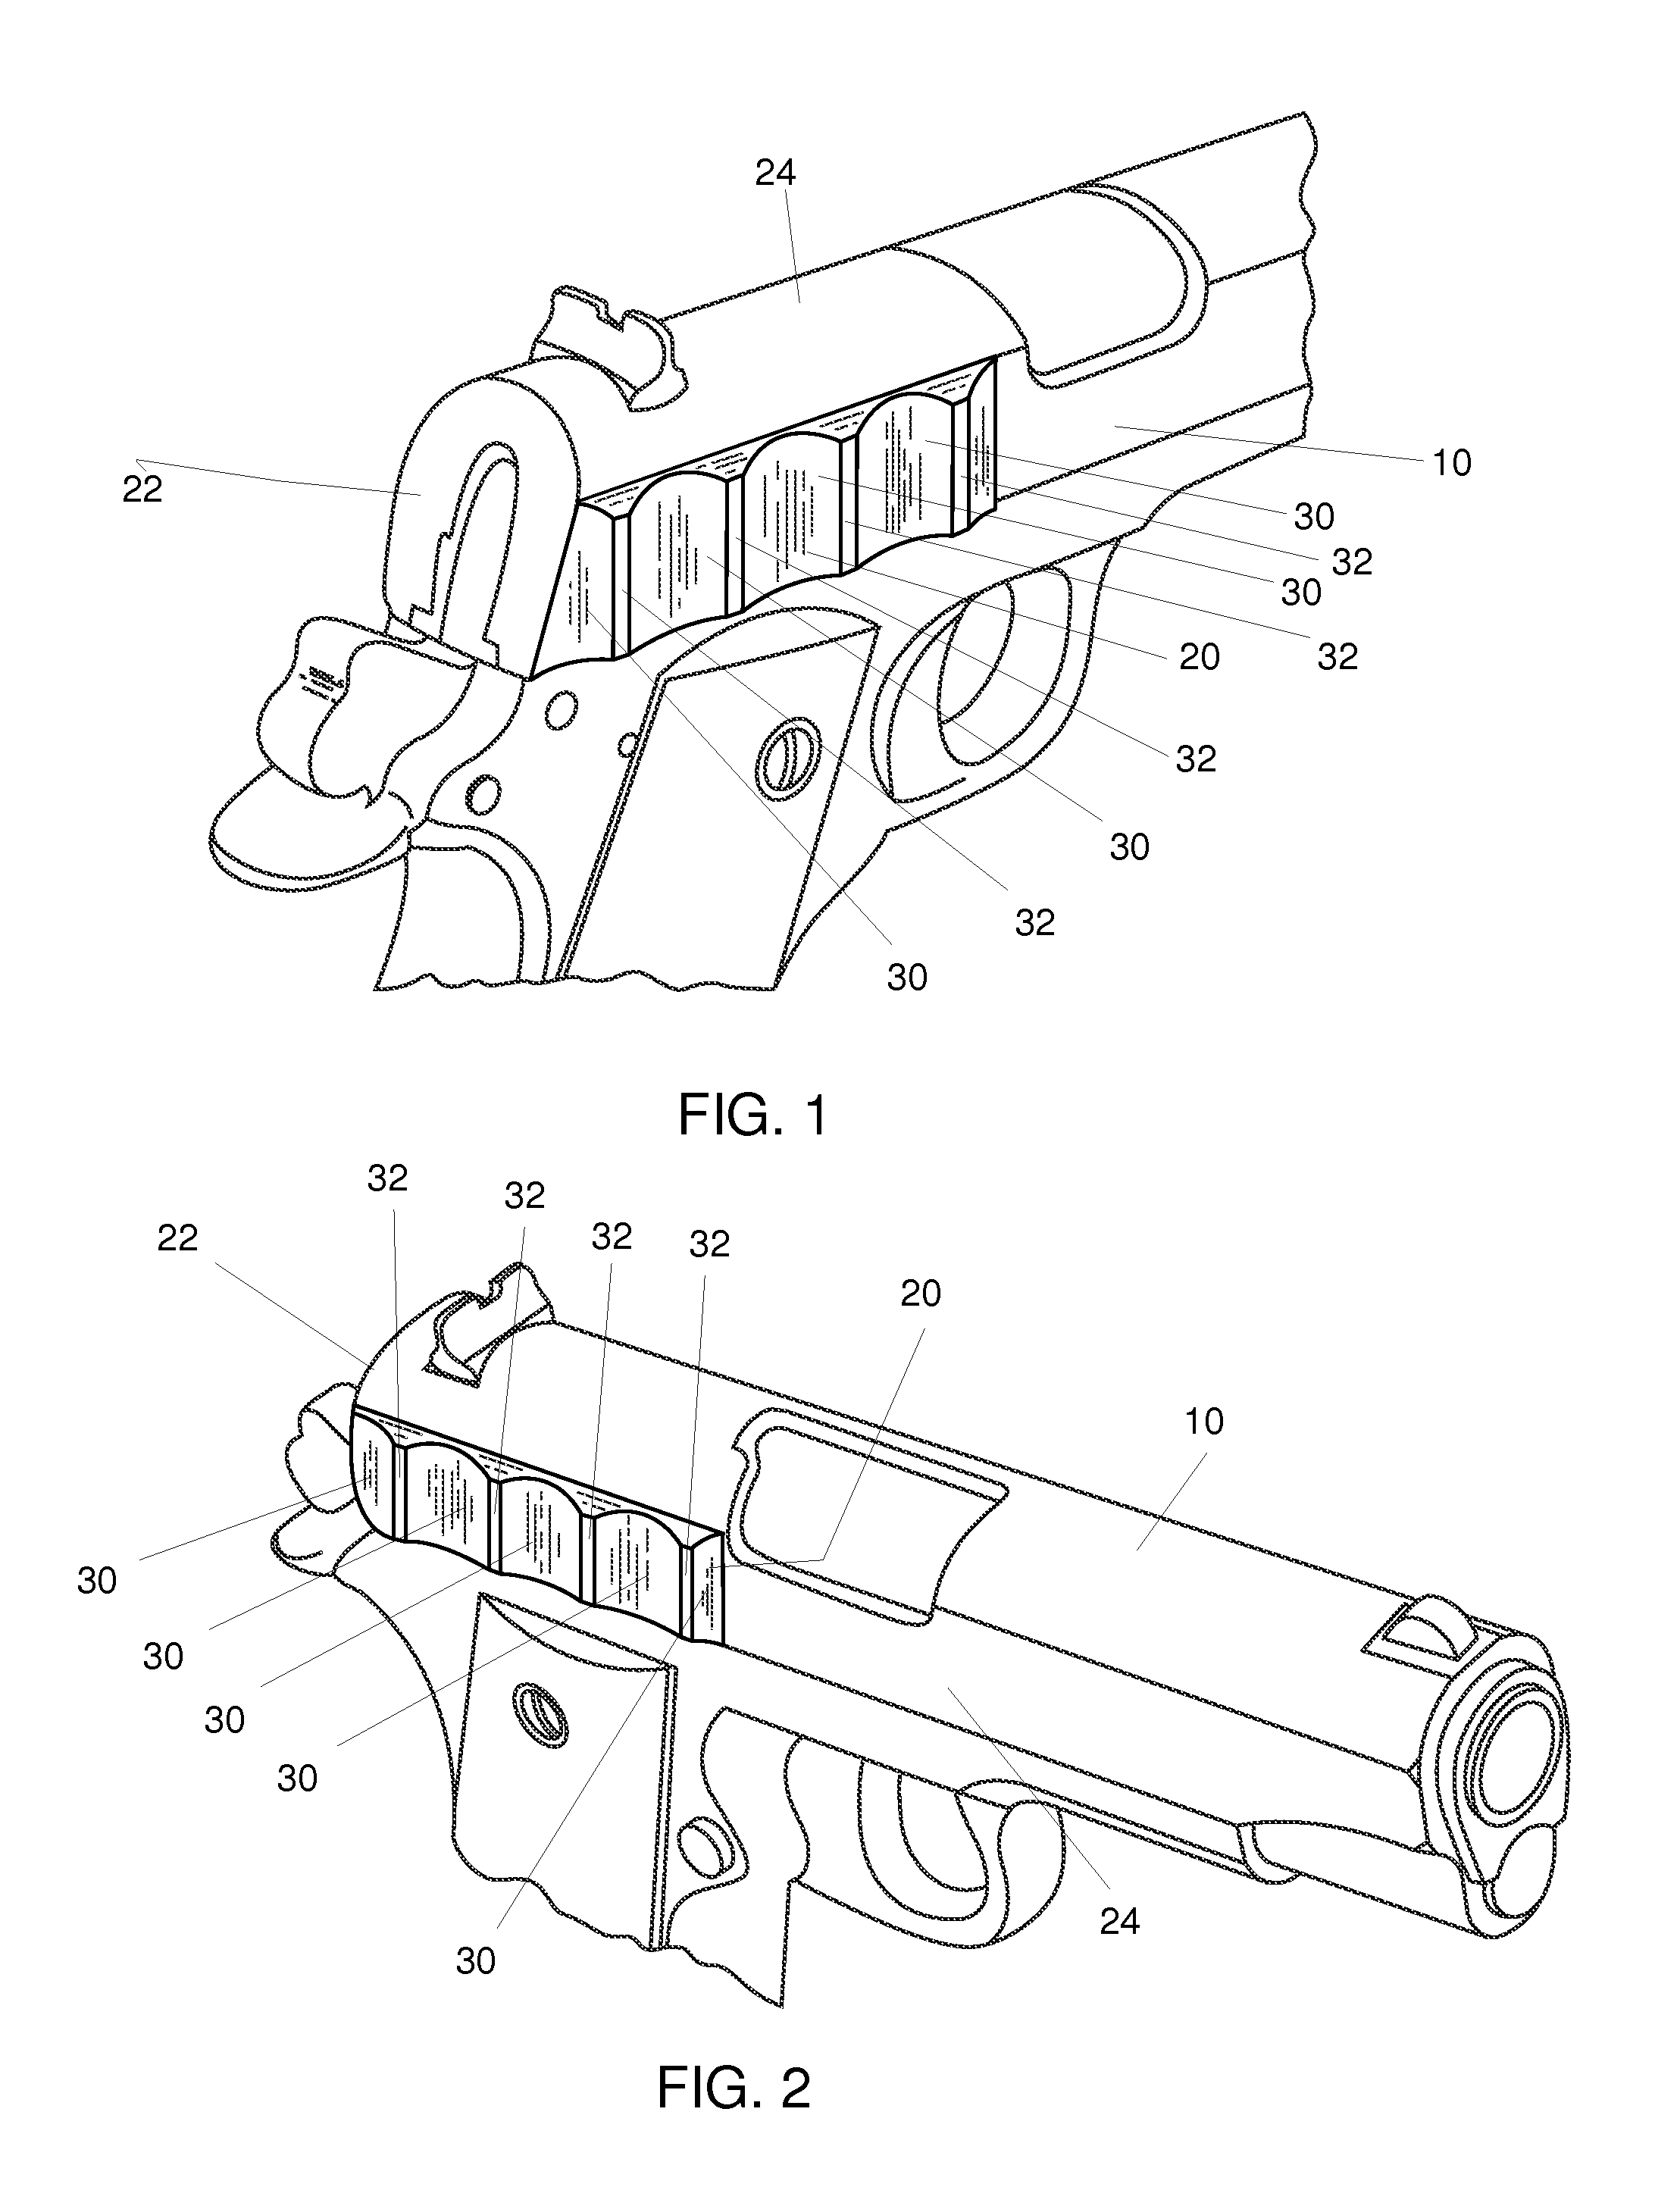 Grip for a Slide of a Semiautomatic Firearm